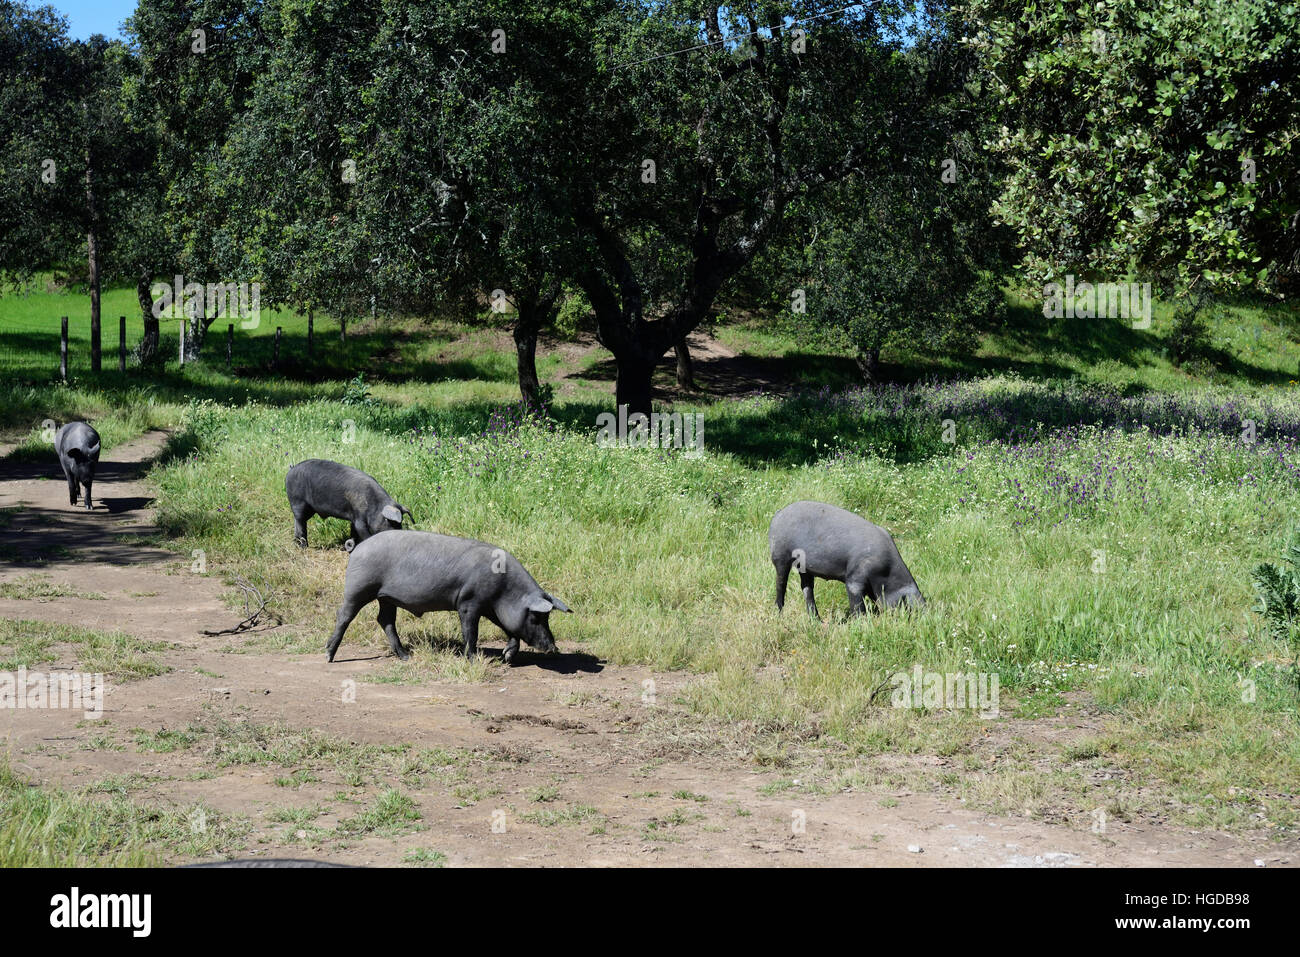 Iberian pig in Andalusia Stock Photo